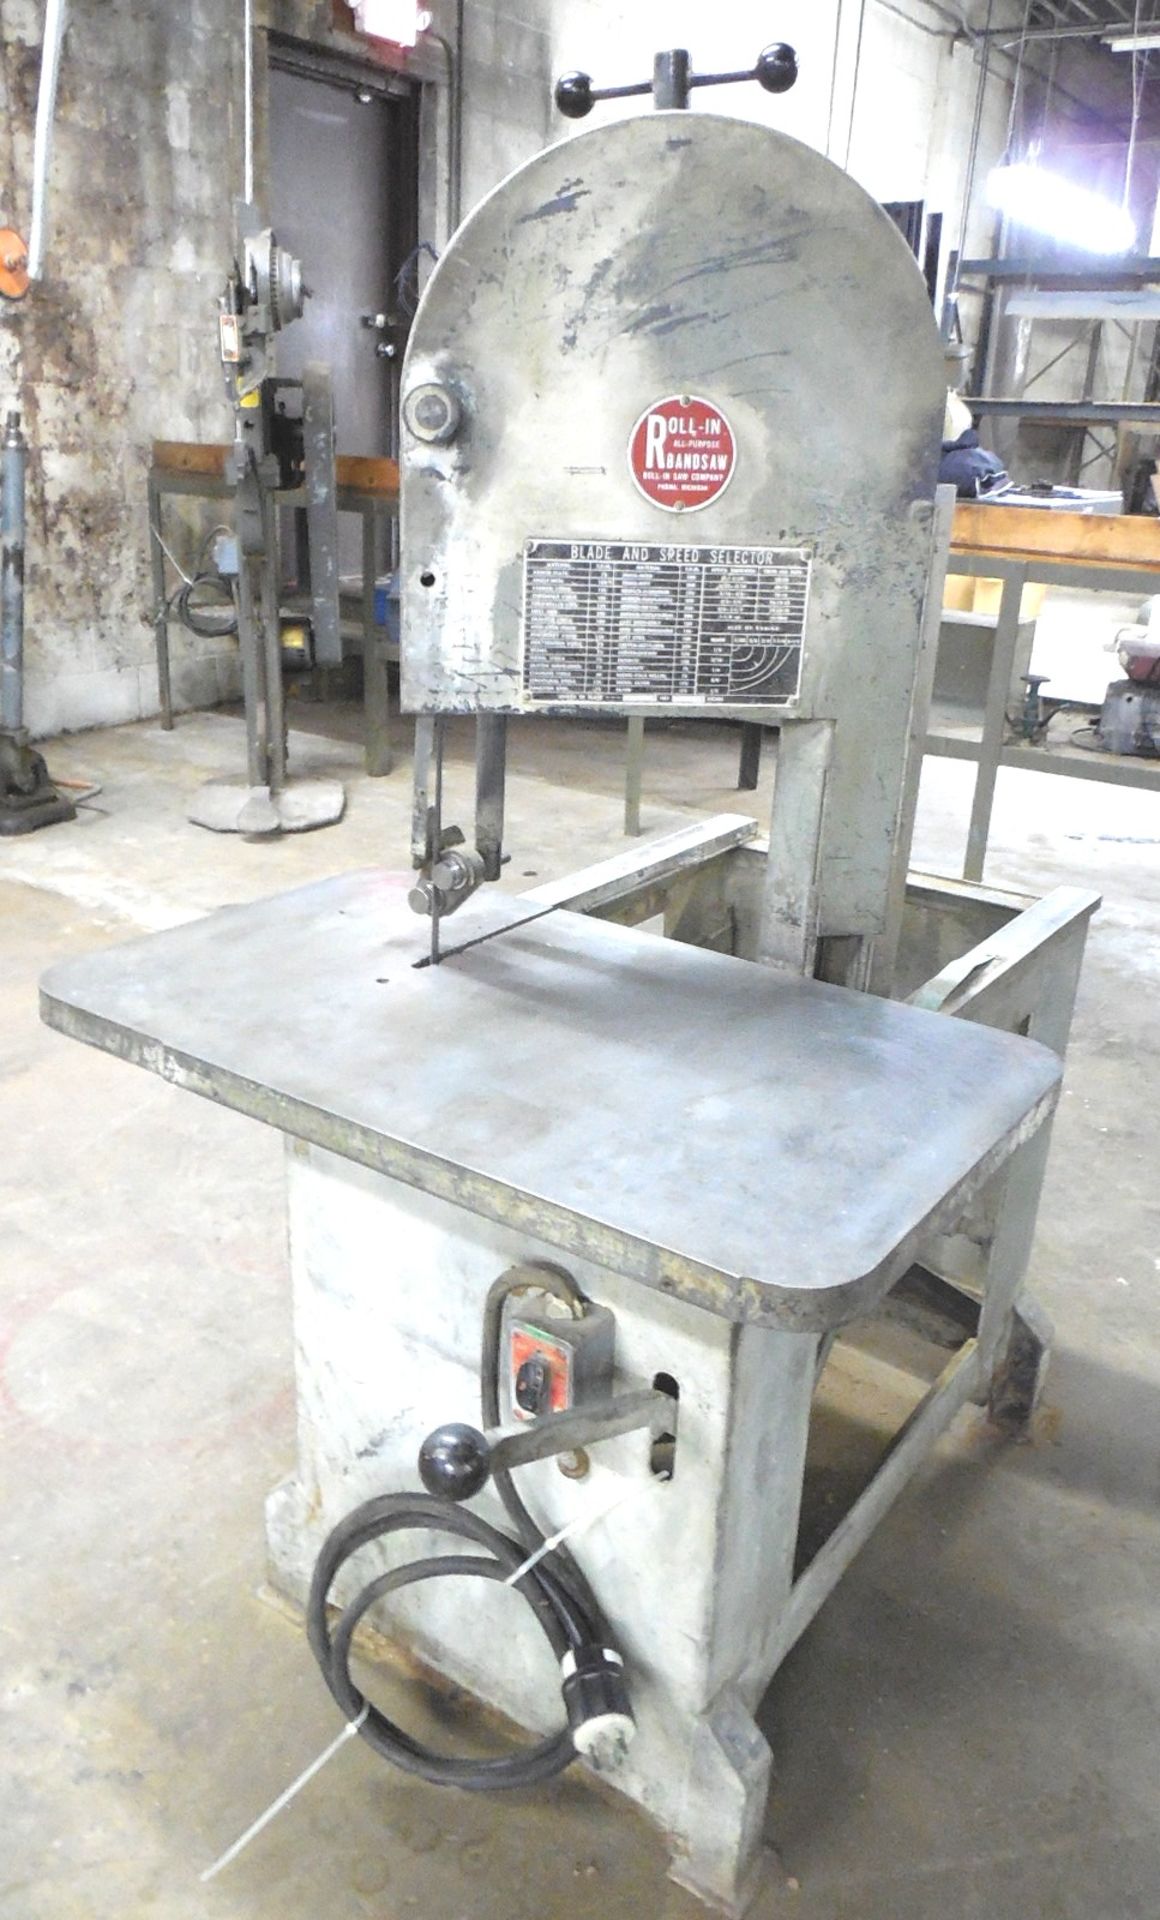 ROLL-IN VERTICAL BAND SAW-S/N 3656, 18.5" x 30" Table, 1HP Motor, 220/440/3/60